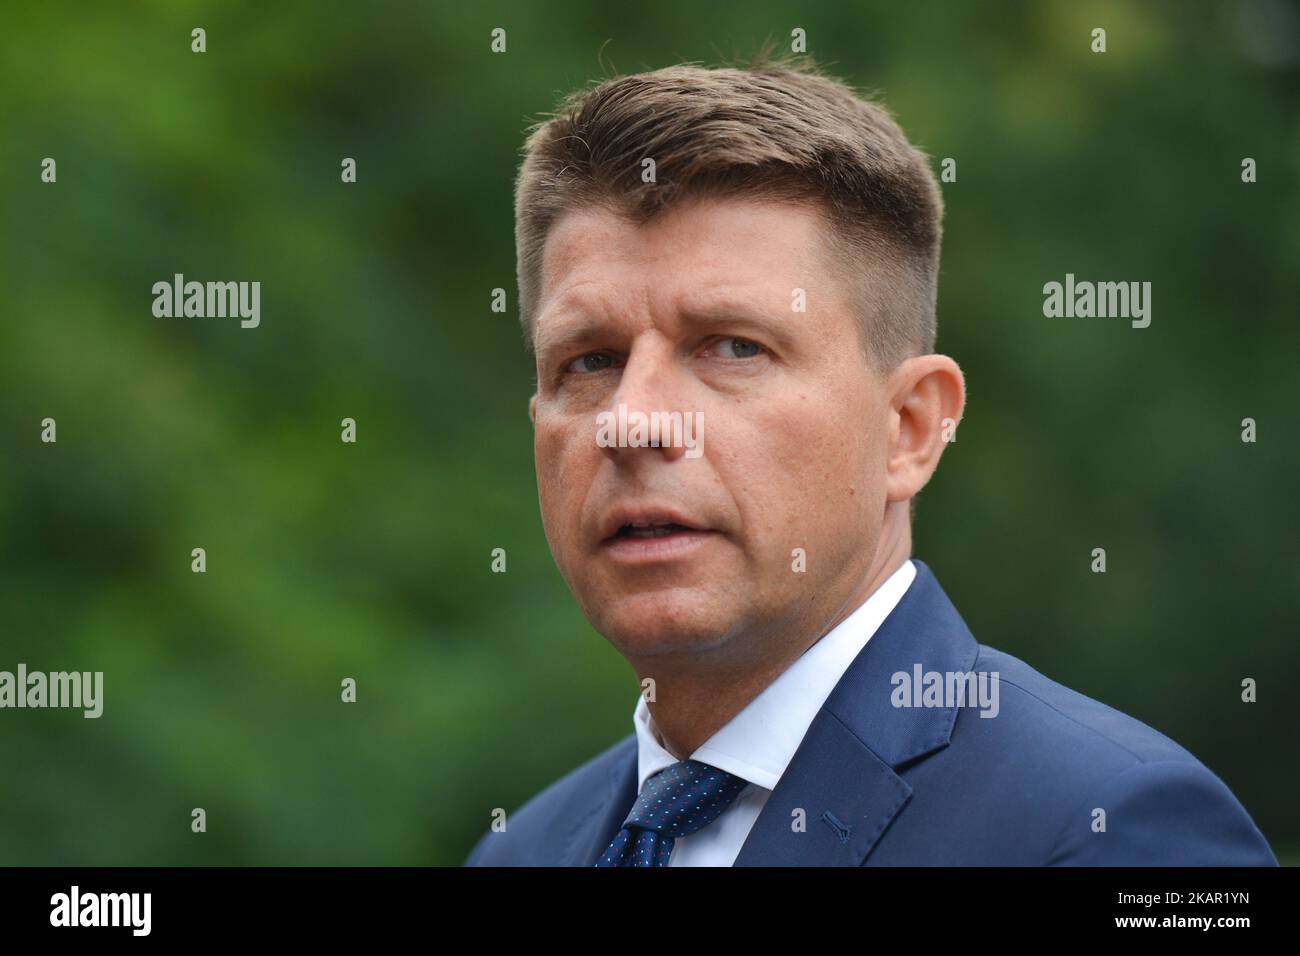 Ryszard Petru, the Leader of 'Nowoczesna' (English: Modern) Political Pary, addresses the media during the press conference about the future of Polish education from 'Nowoczesna' point of view, organised in Warsaw on the starting day of 2017/2018 school year. On Monday, September 4, 2017, in Warsaw, Poland. (Photo by Artur Widak/NurPhoto)  Stock Photo